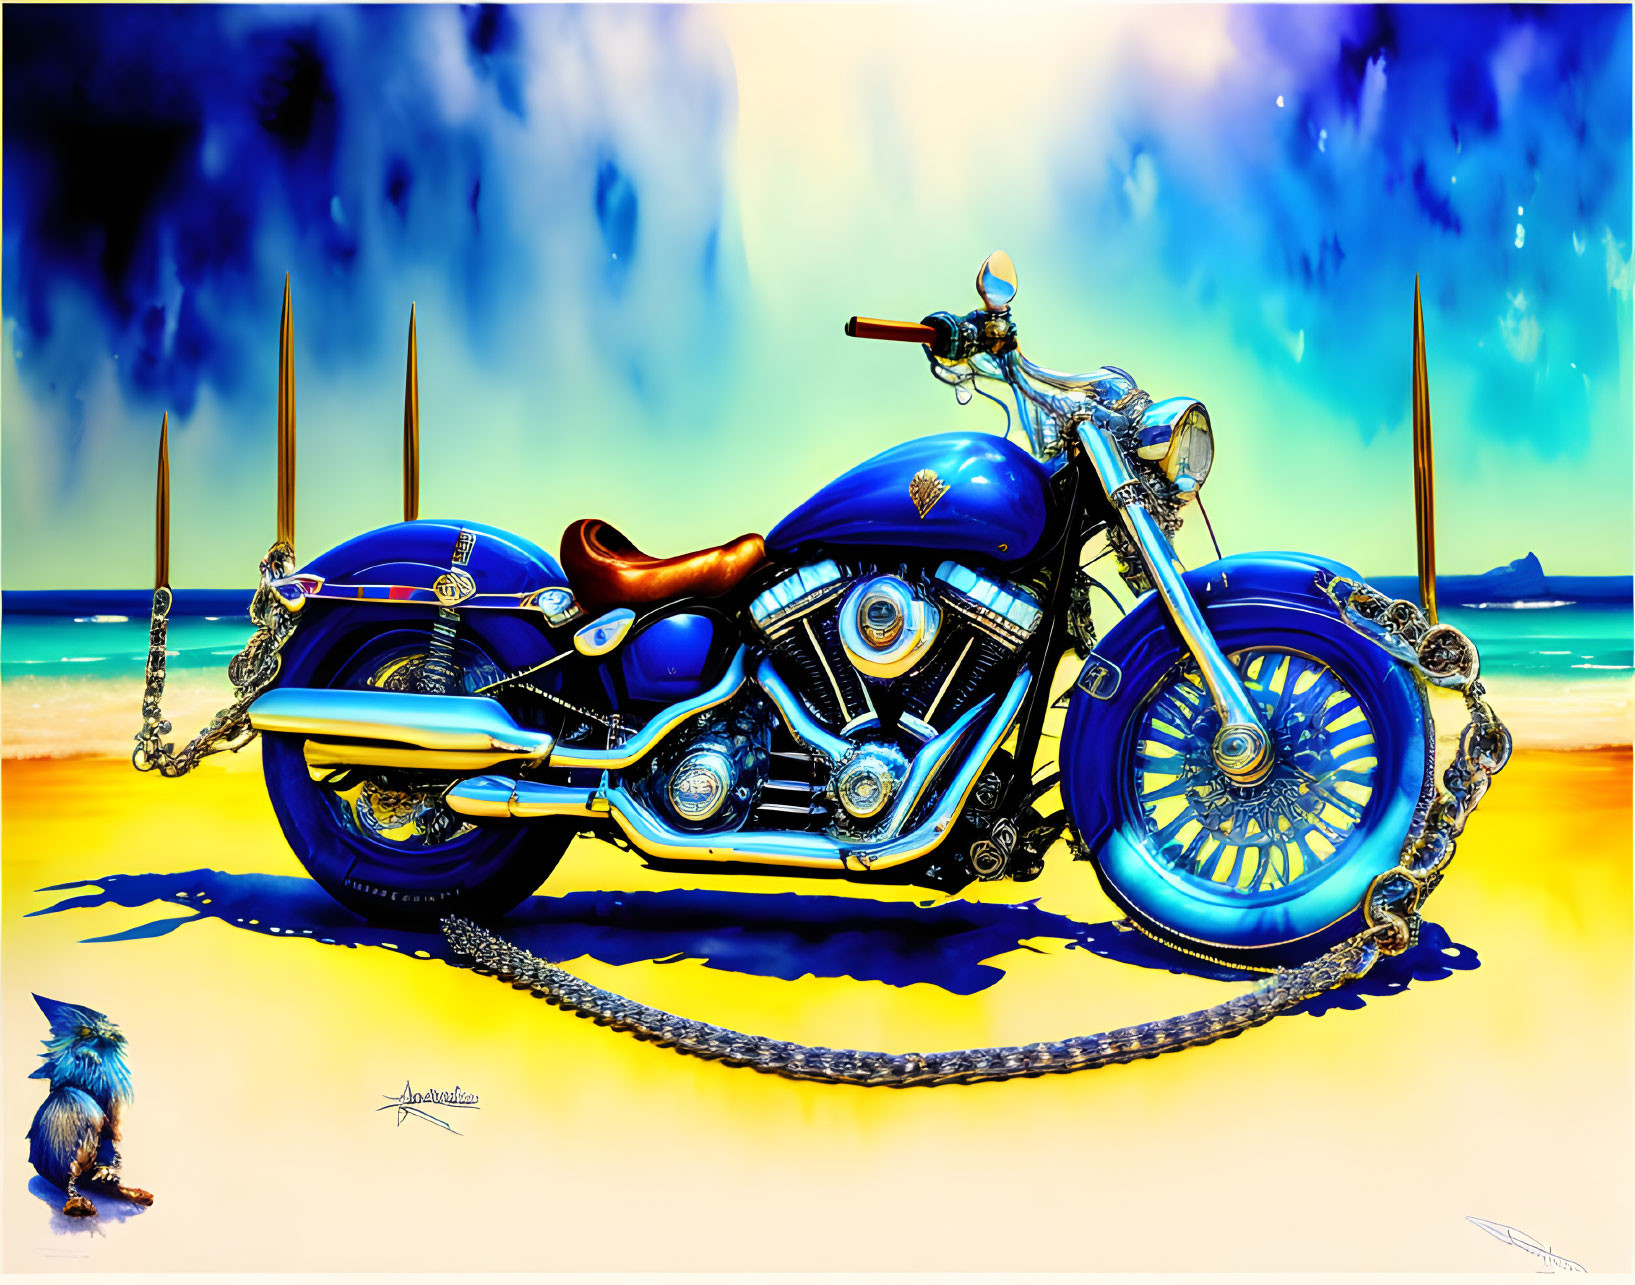 A bright blue Harley Davidson with chains